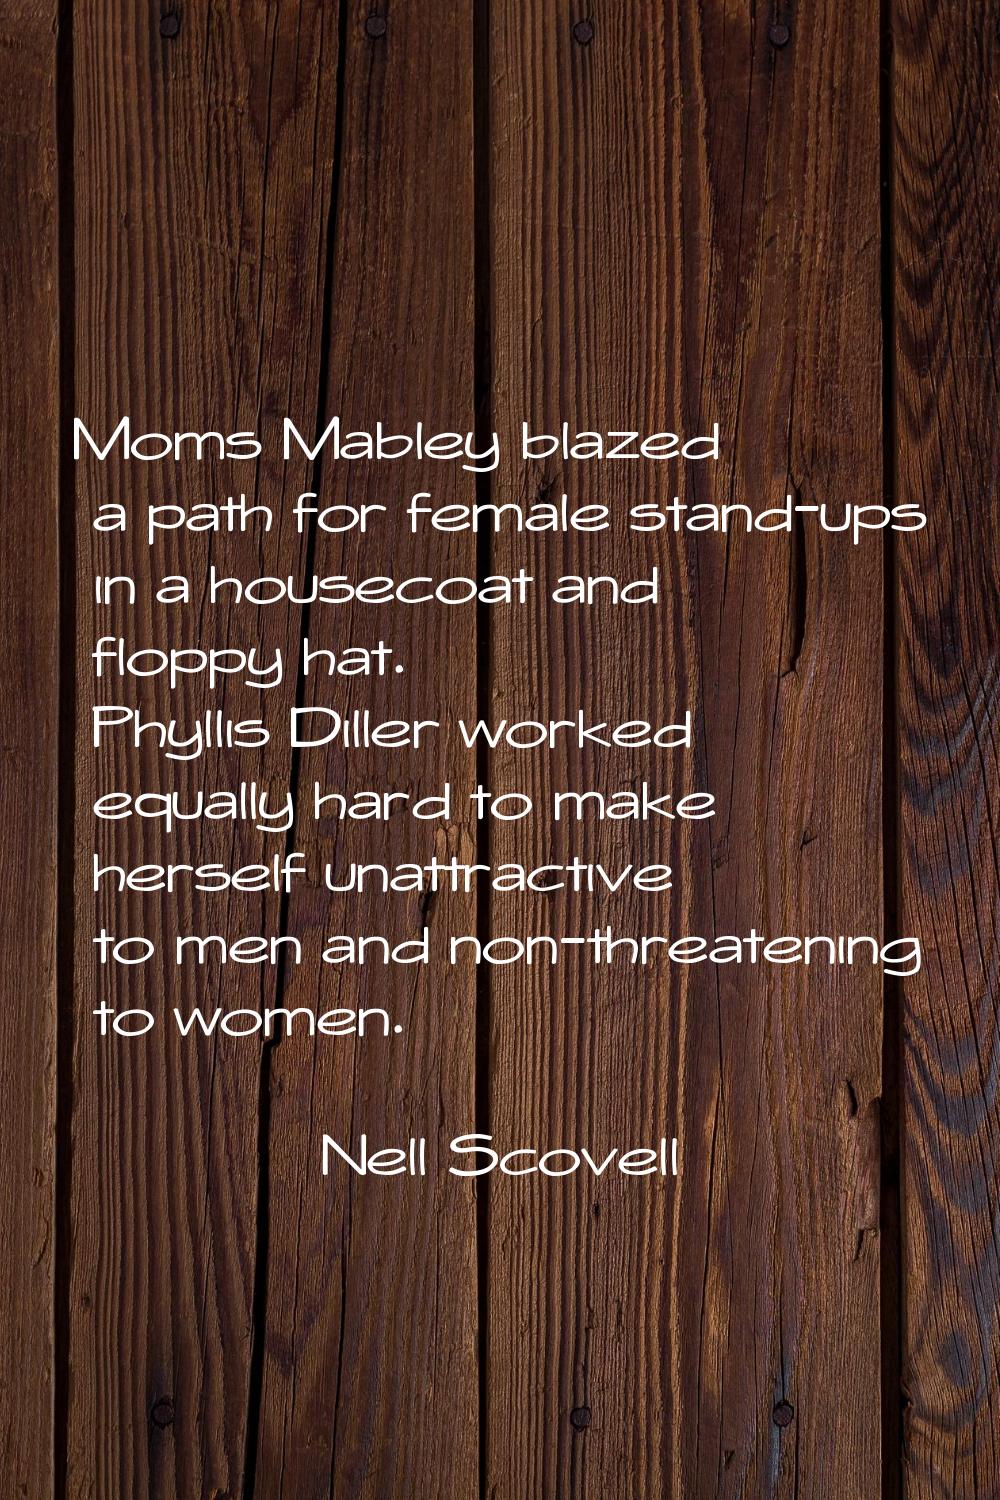 Moms Mabley blazed a path for female stand-ups in a housecoat and floppy hat. Phyllis Diller worked